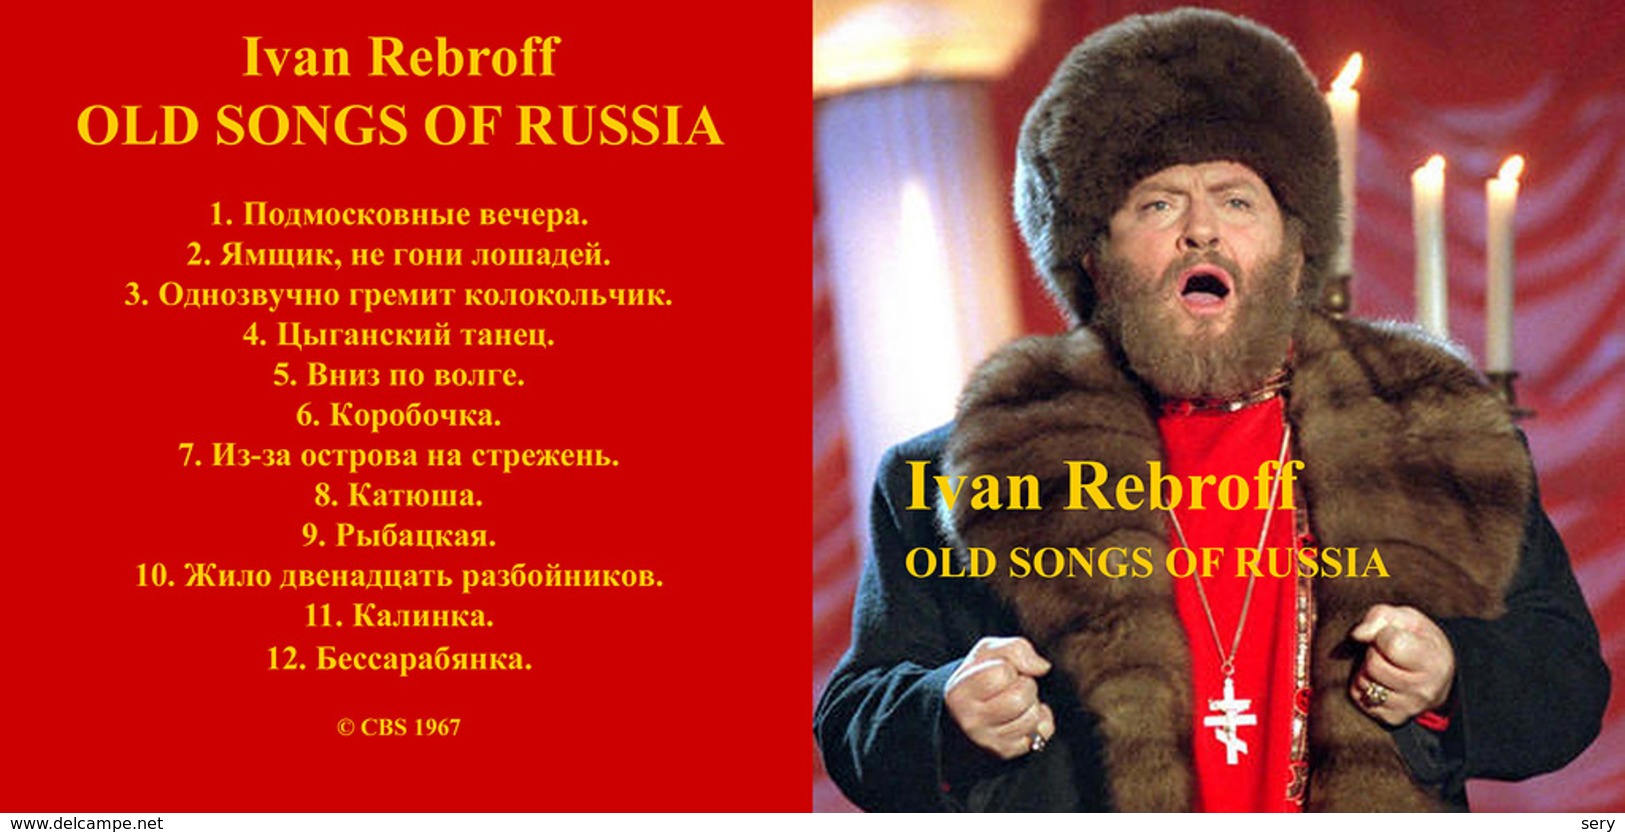 Superlimited Edition CD Ivan Rebroff. OLD SONGS OF RUSSIA I - Country & Folk